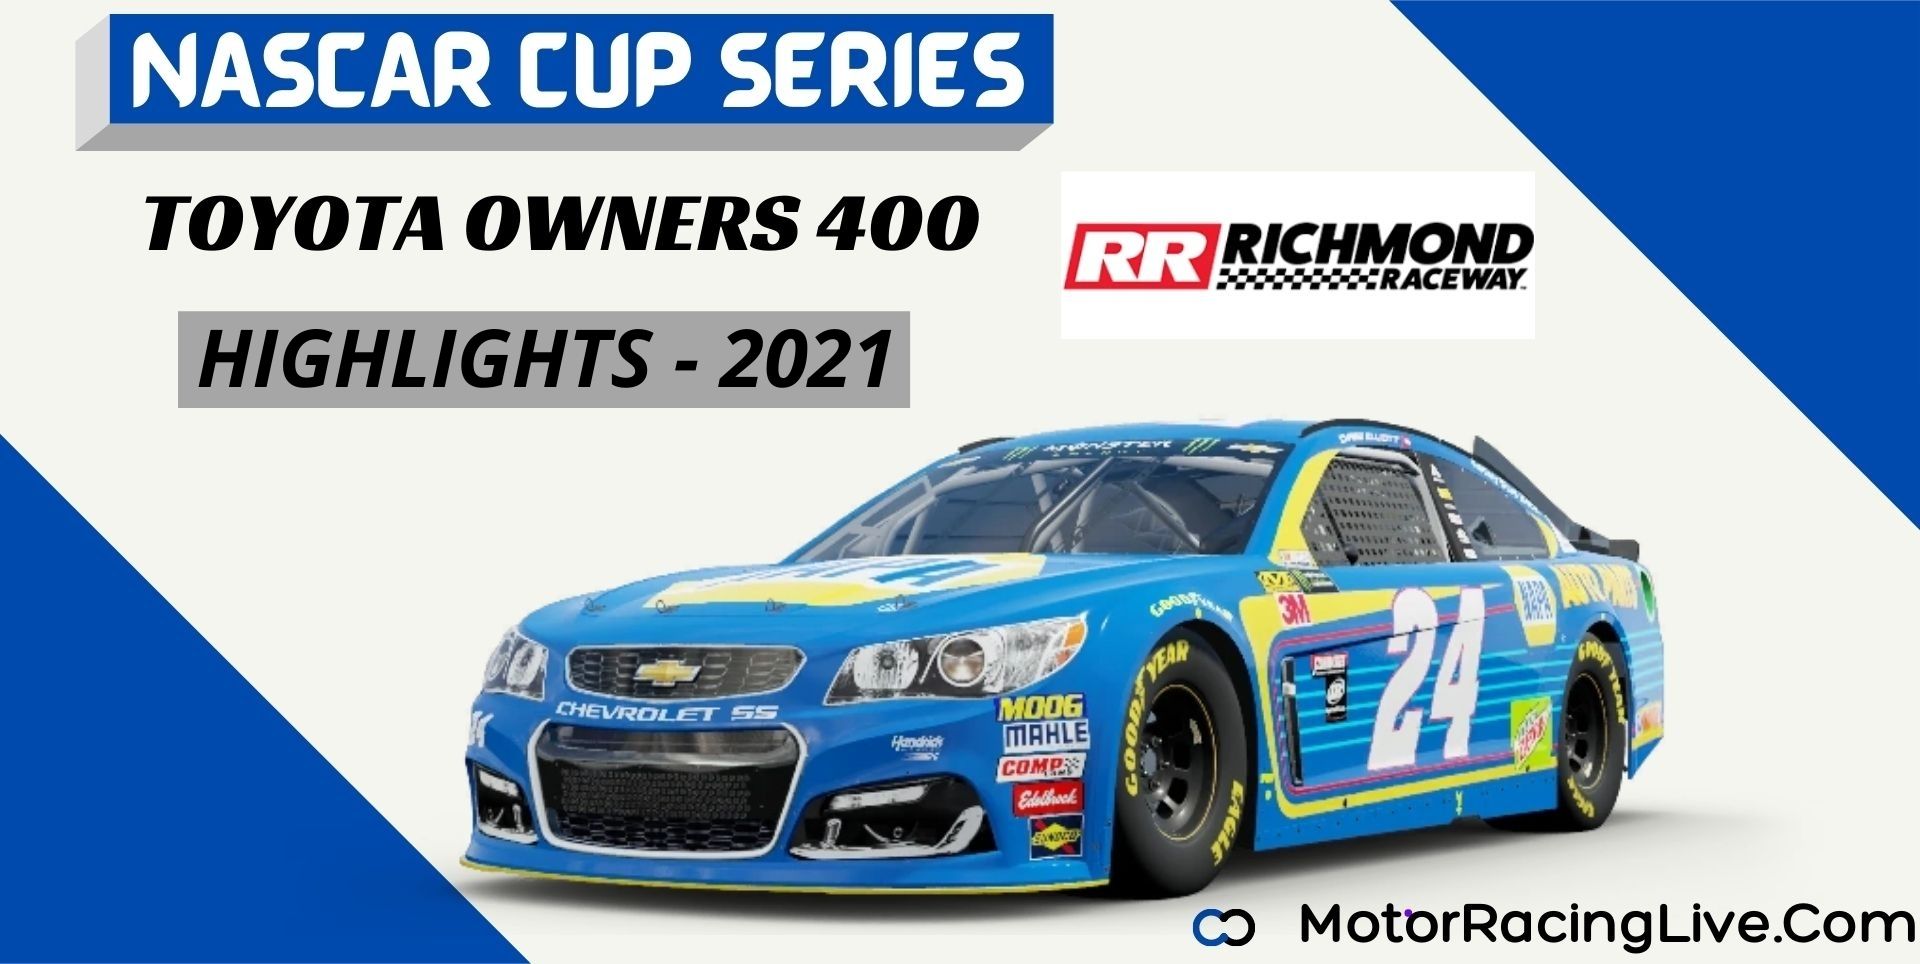 Toyota Owners 400 Highlights 2021 NASCAR Cup Series